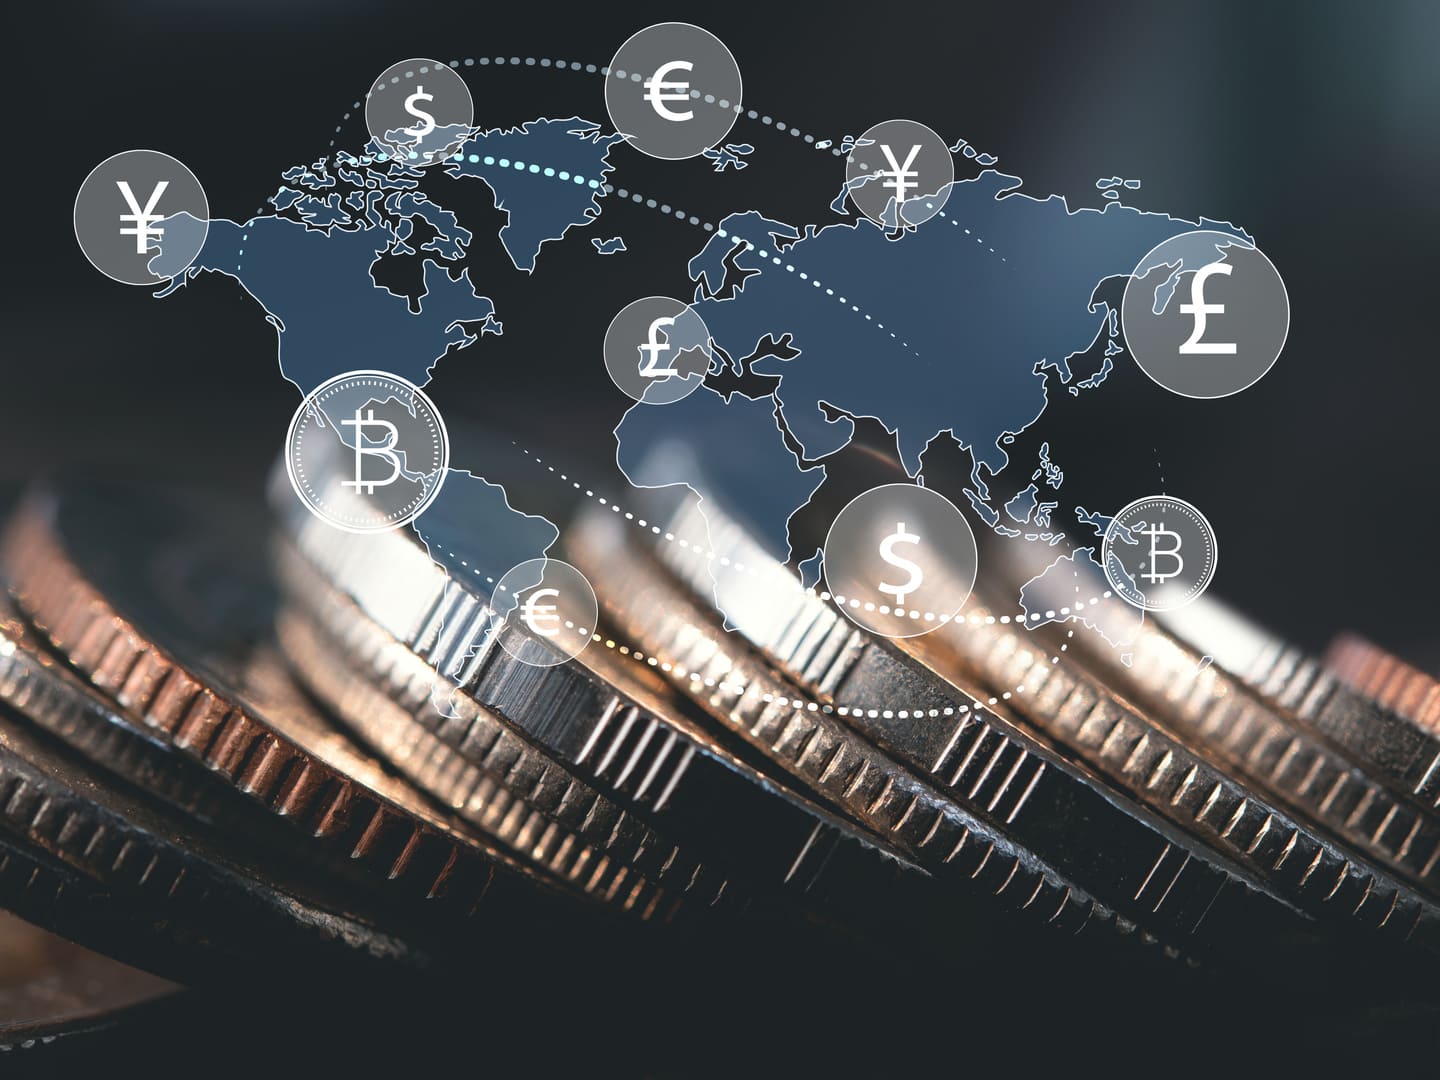 K33 Research Report Reveals Crypto Industry Worth $180 Billion